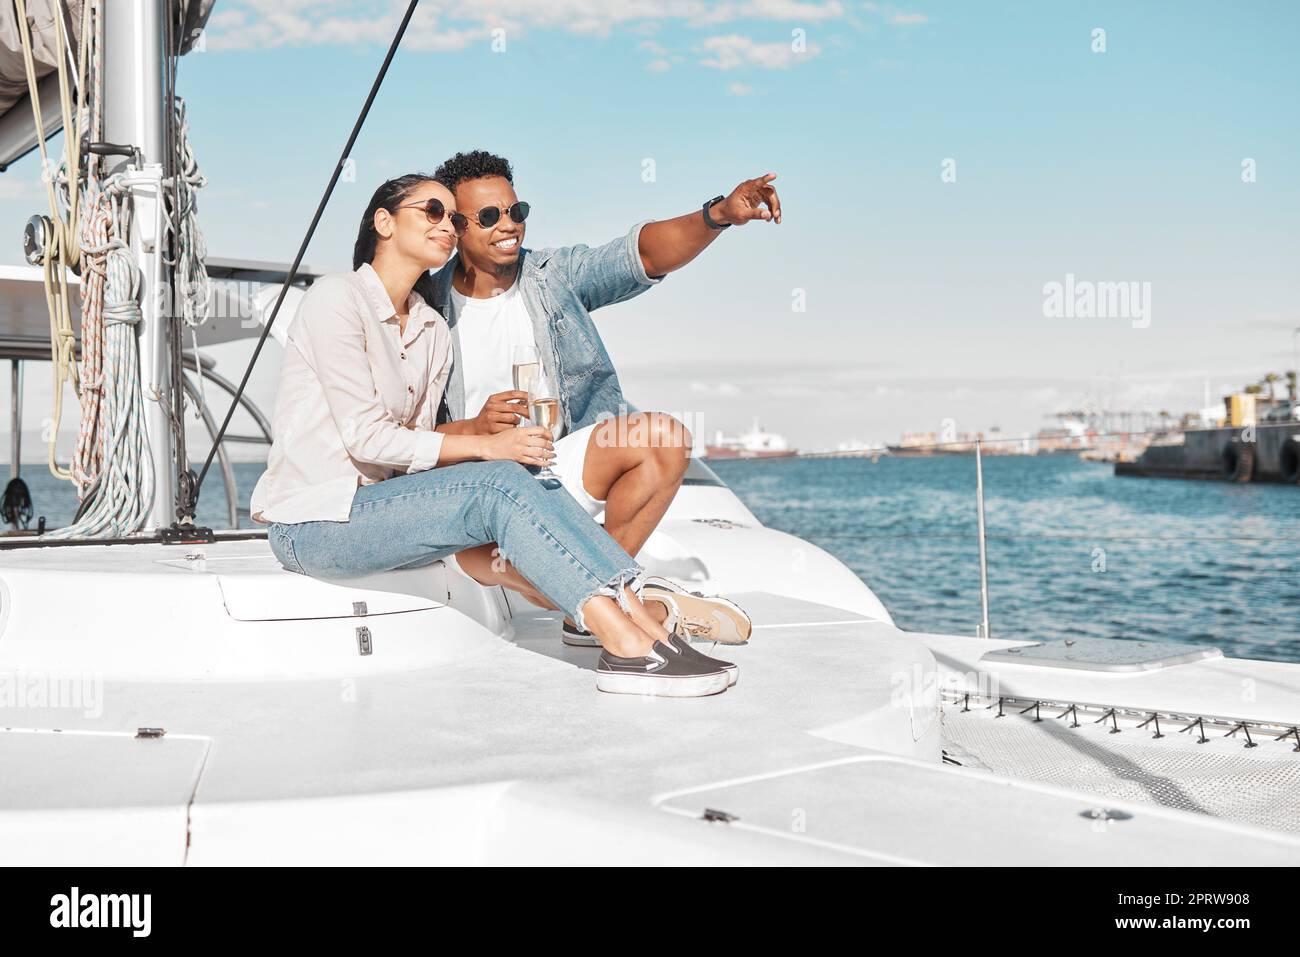 Couple, love and yacht with a man and woman out at sea or on the ocean for romance and a luxury date or cruise. Happy, trust and care with a young male and female on a boat in the water together Stock Photo